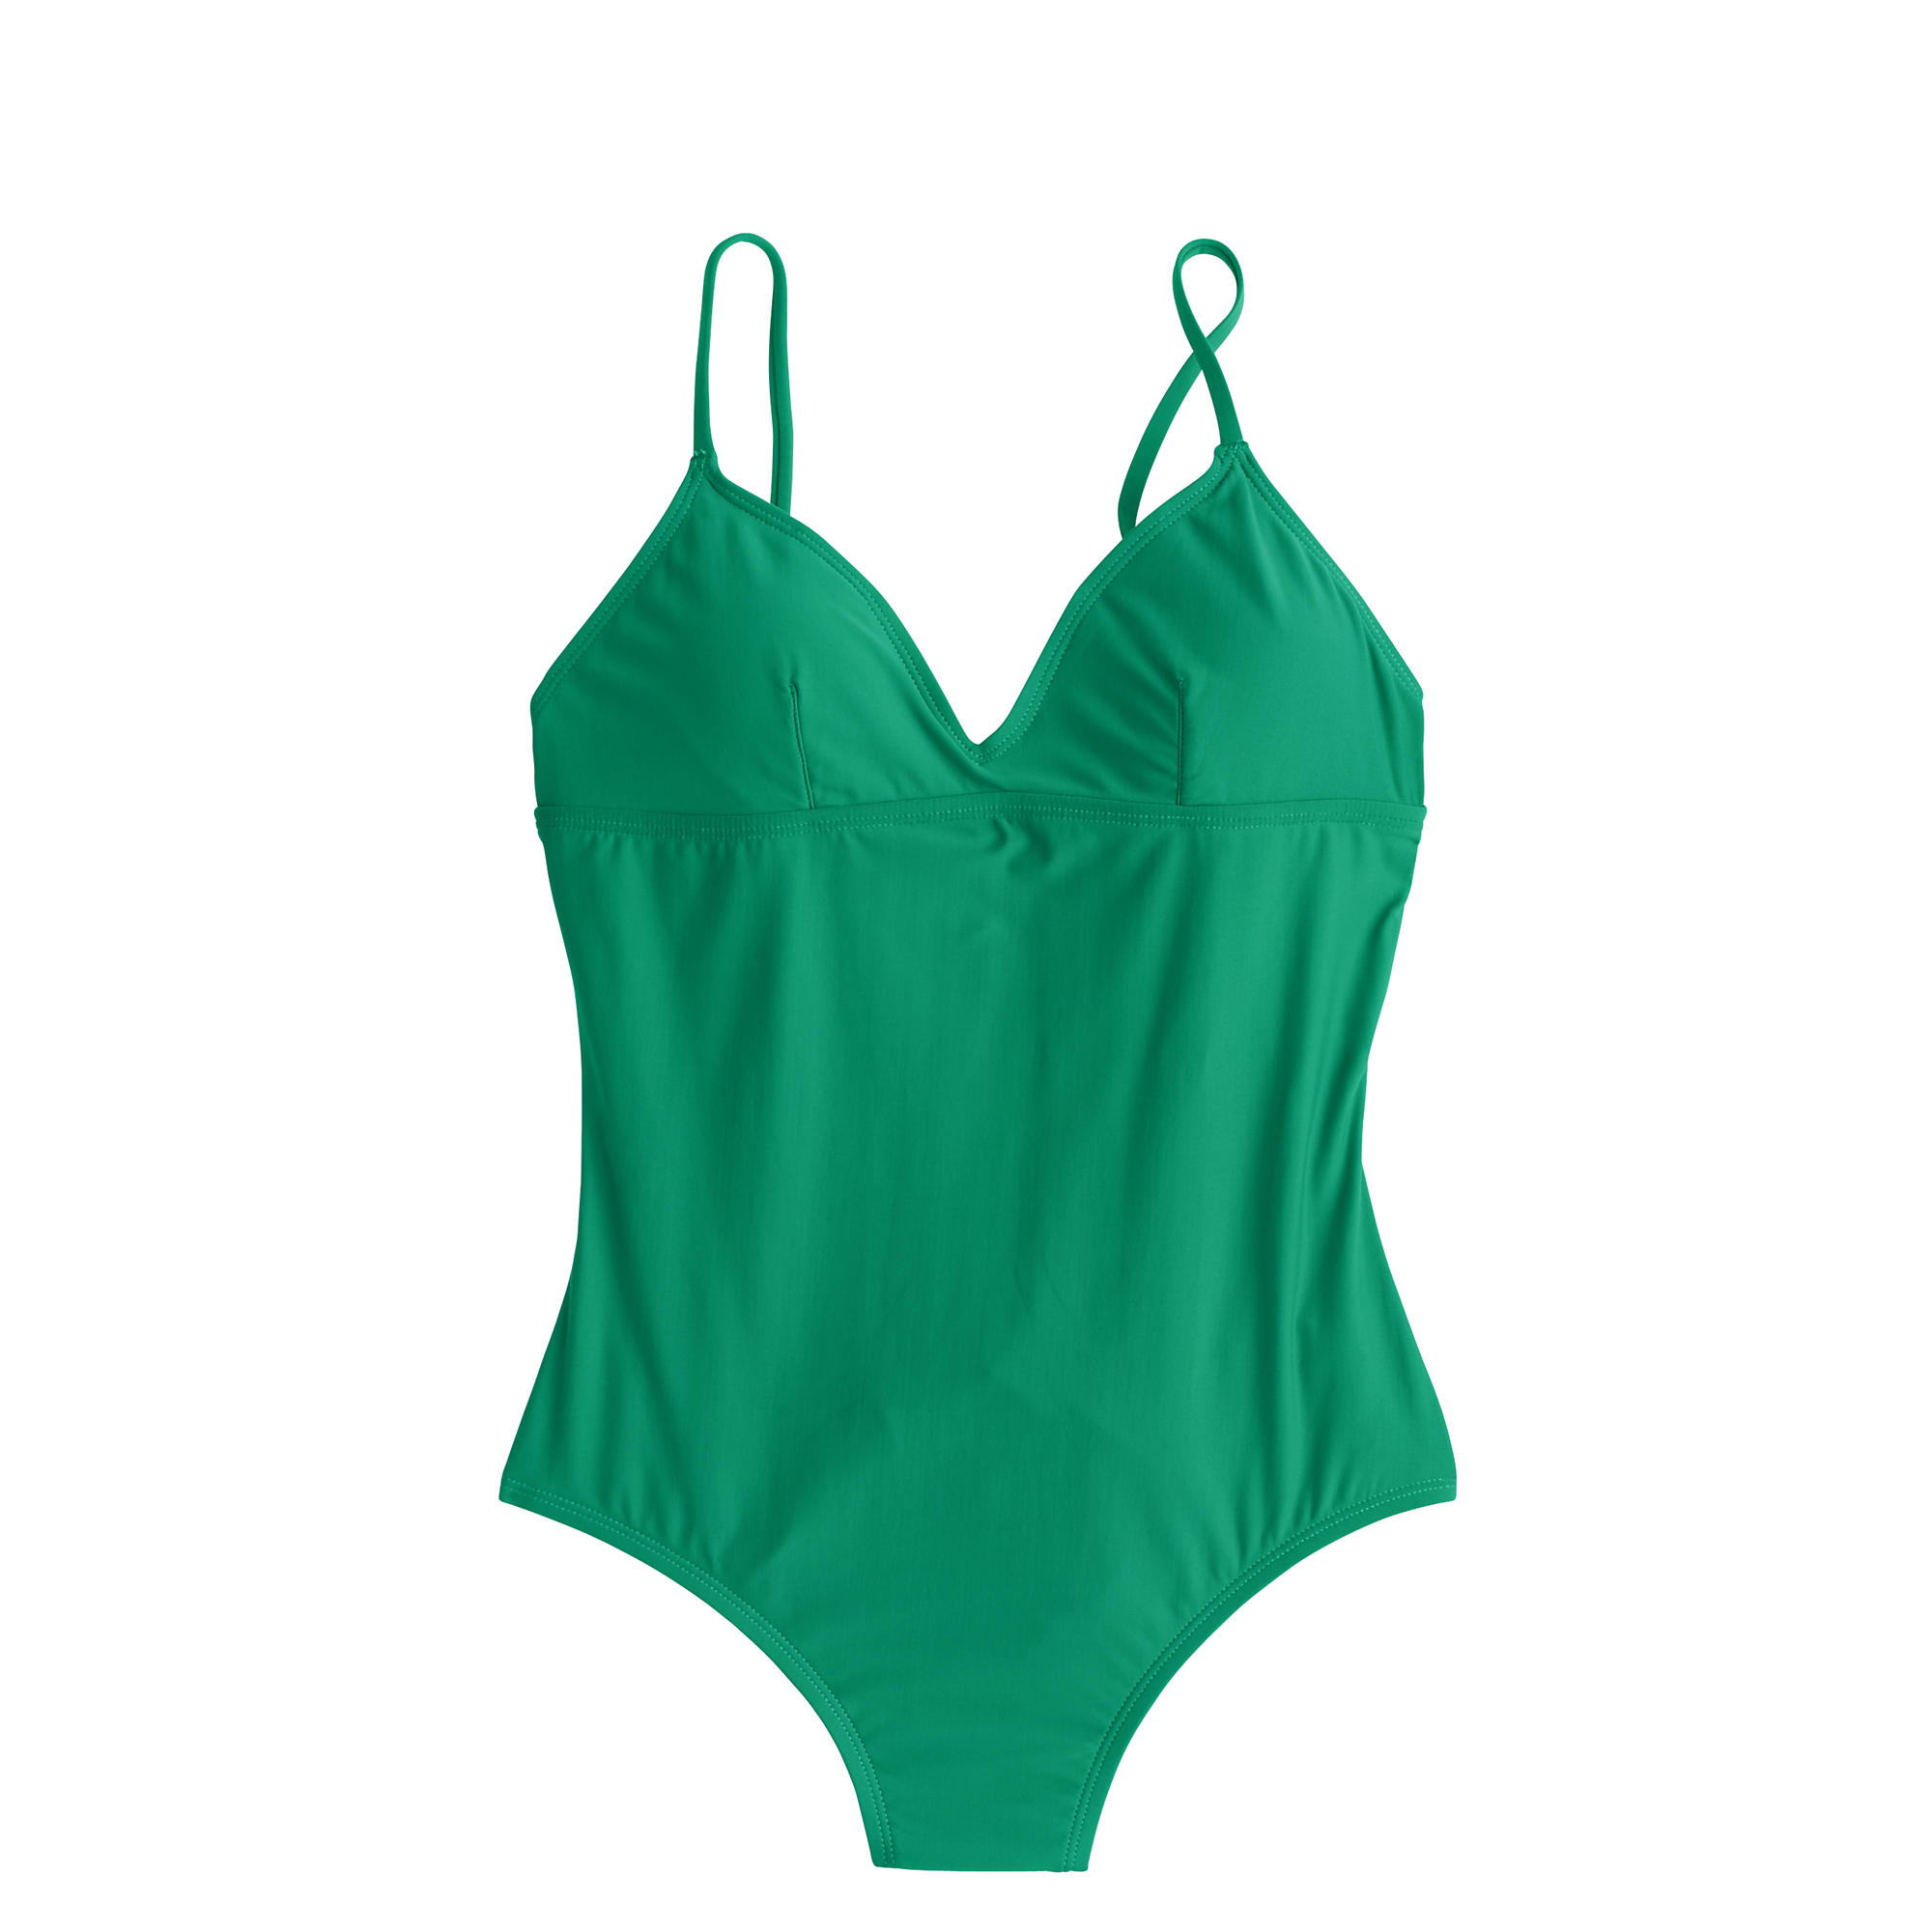 J.crew V-neck One-piece Swimsuit in Green | Lyst